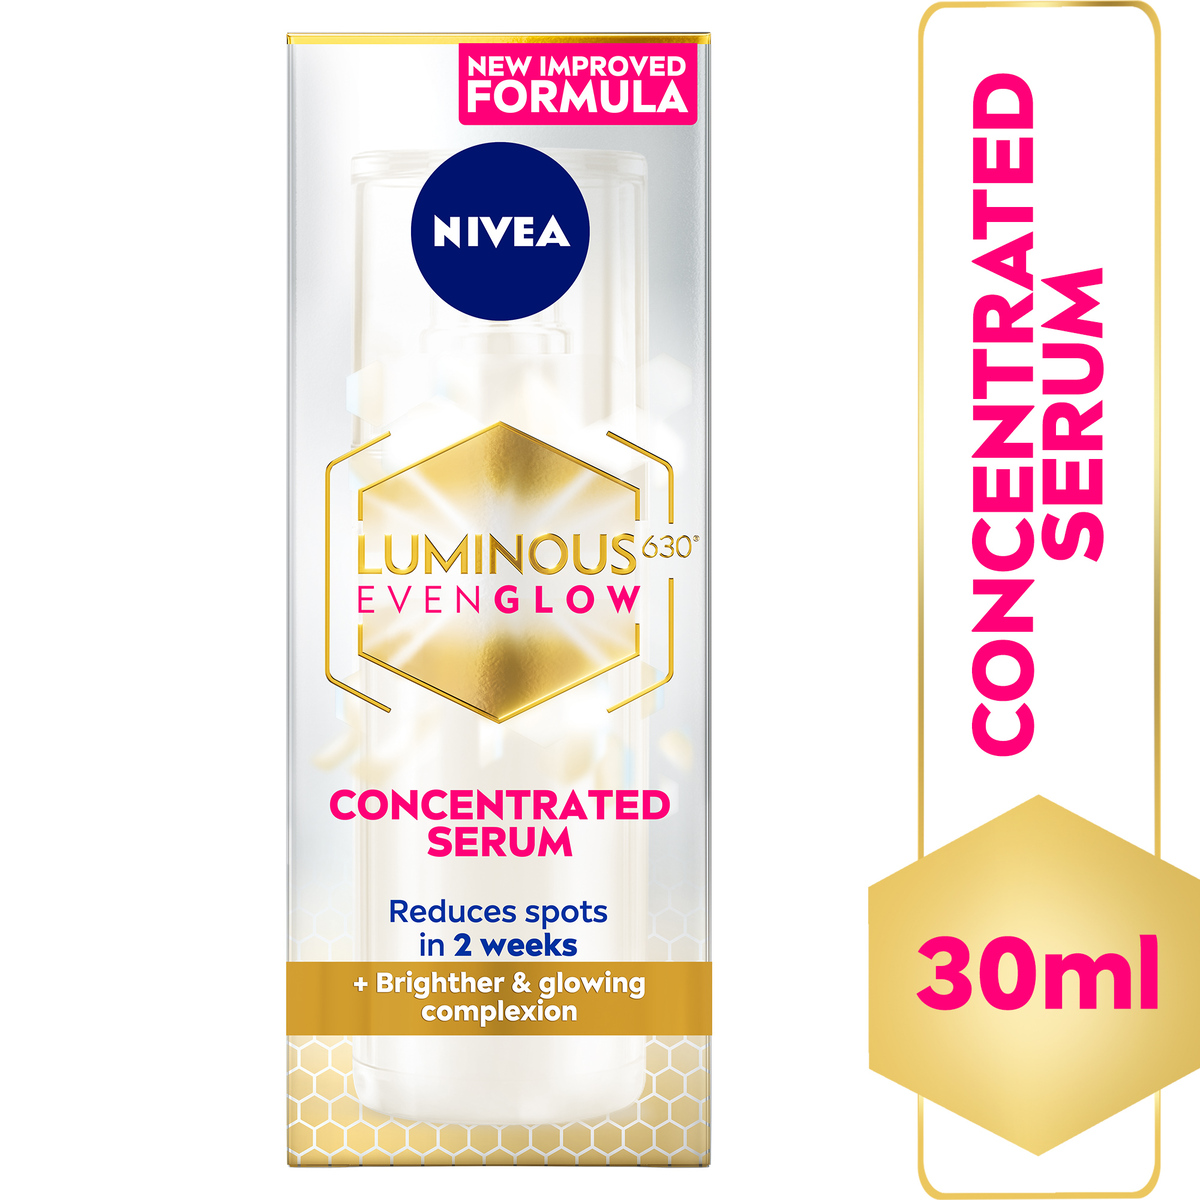 Buy Nivea Concentrated Face Serum Luminous630 Even Glow 30 ml Online at Best Price | Other Facial Care | Lulu Kuwait in Kuwait